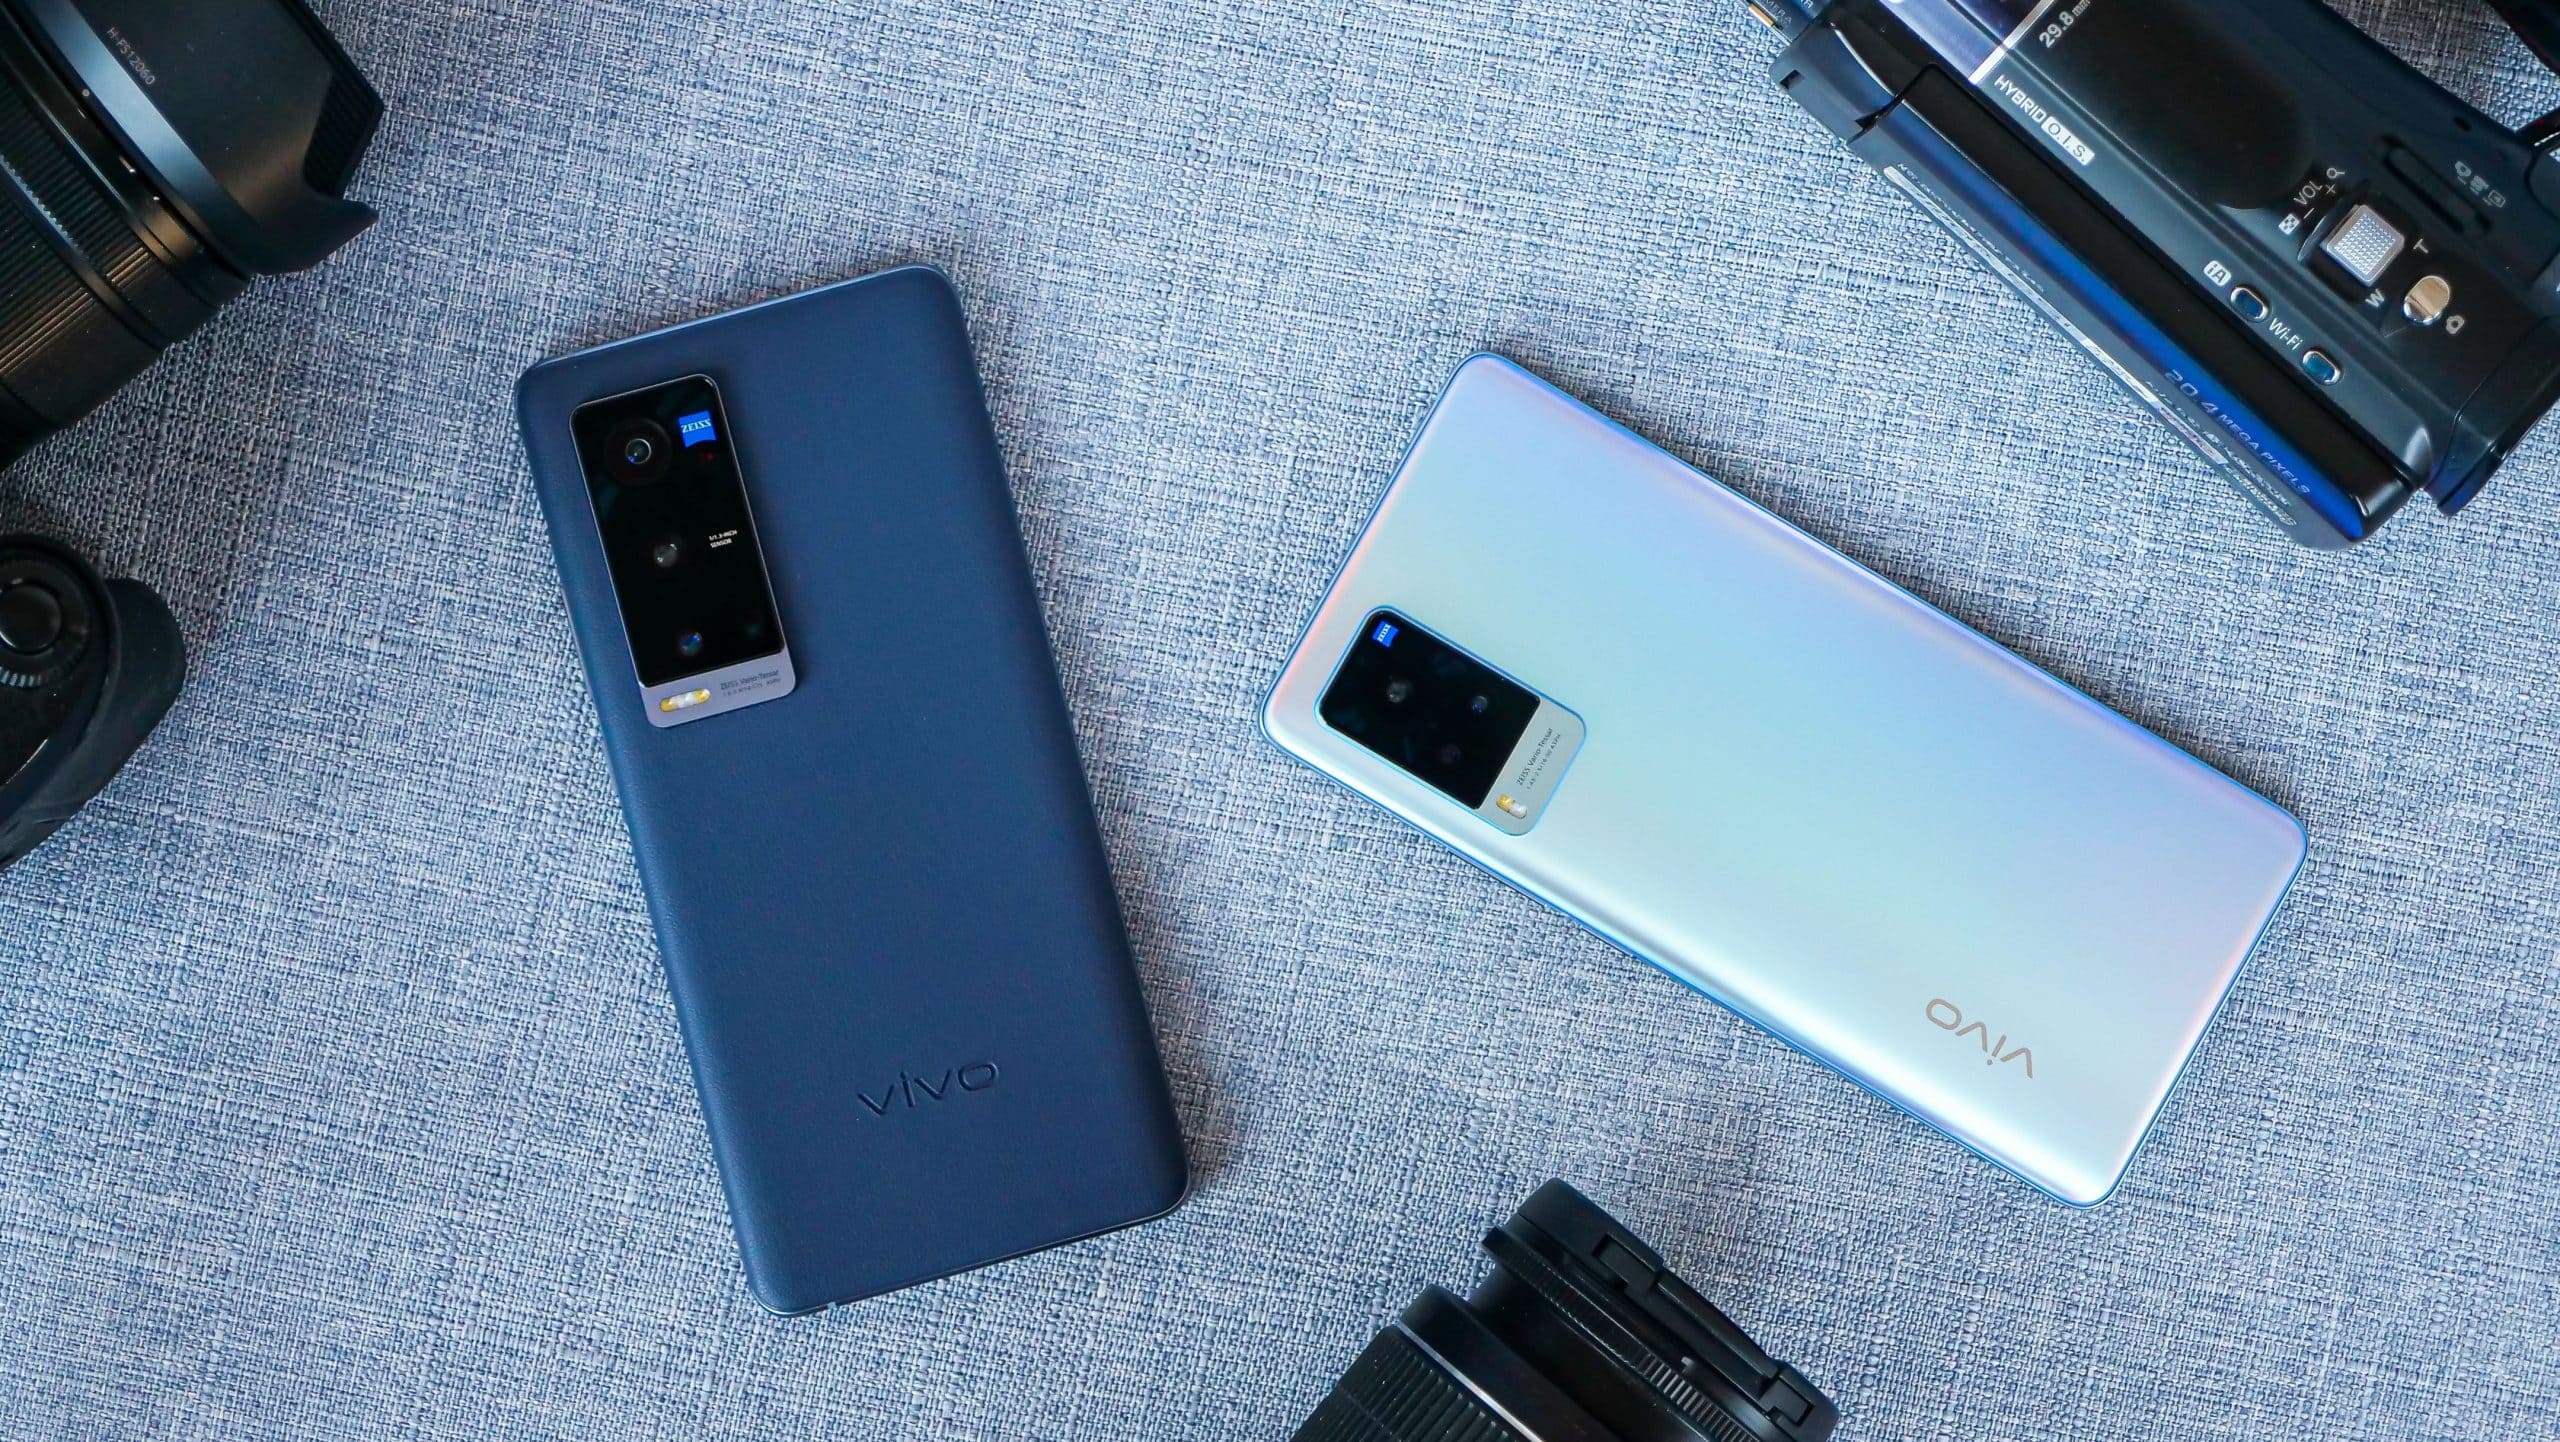 Vivo tops the Chinese smartphone market and Honor beats Huawei